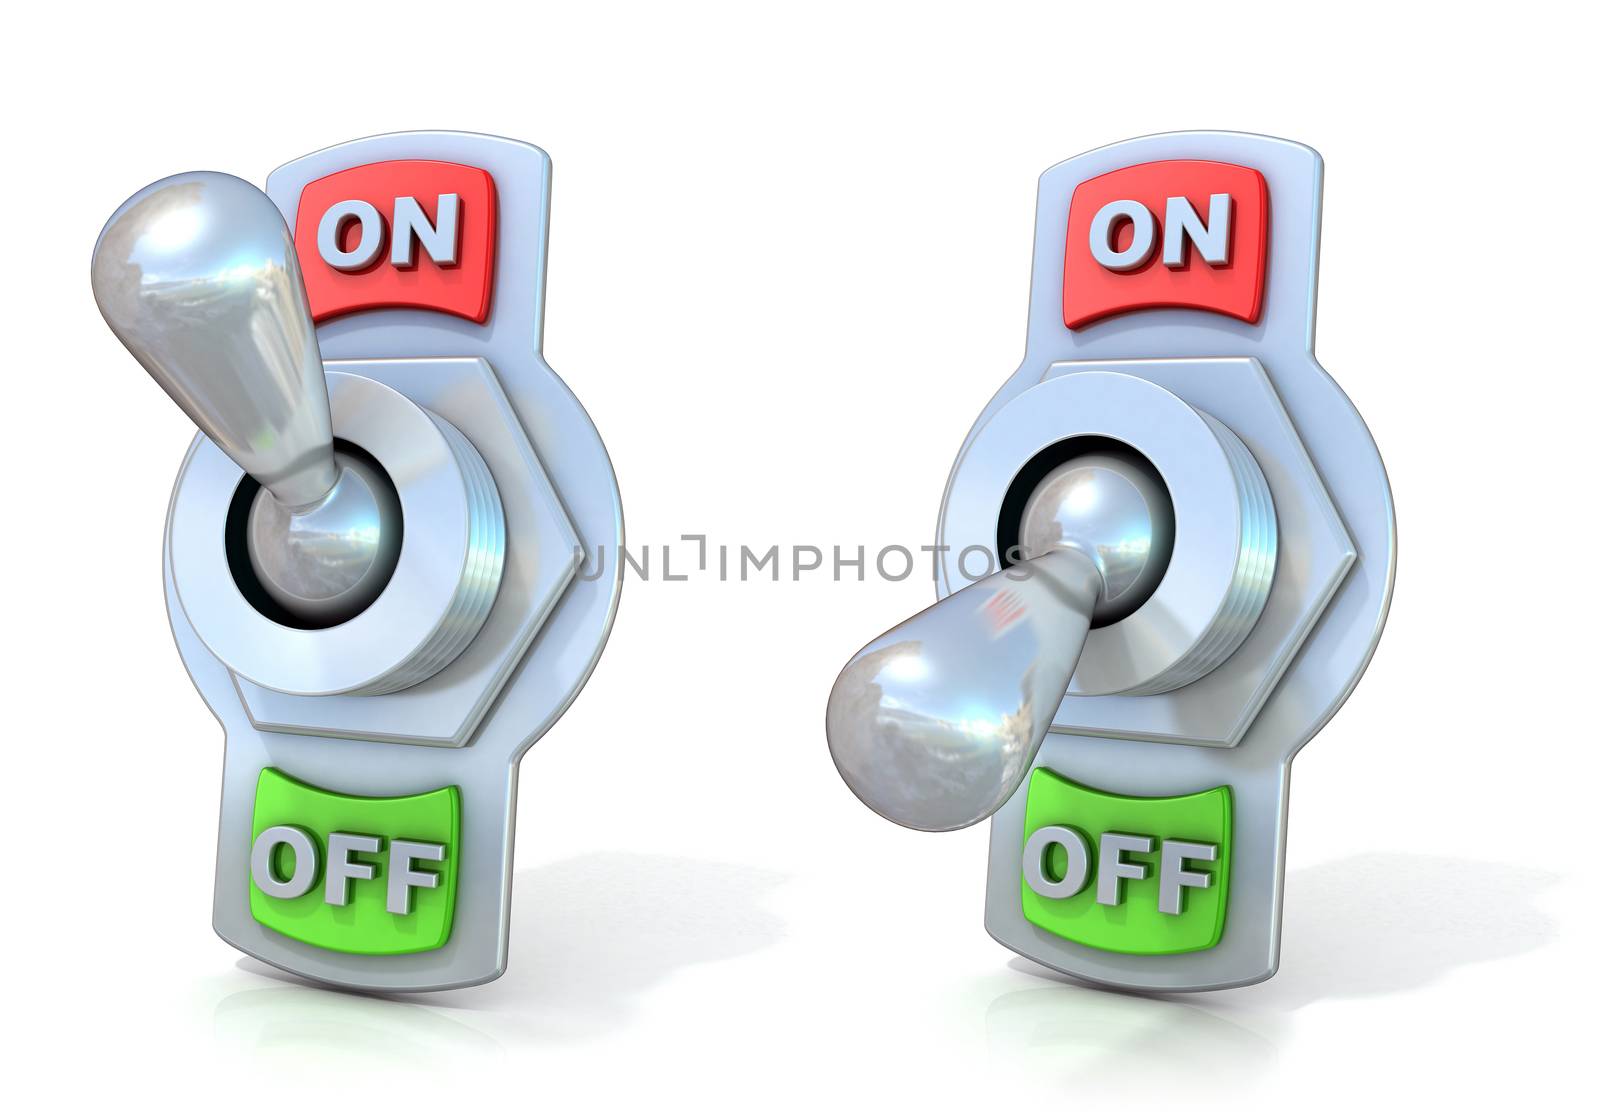 On and off metal toggle switches. 3D render illustration isolated on white background.